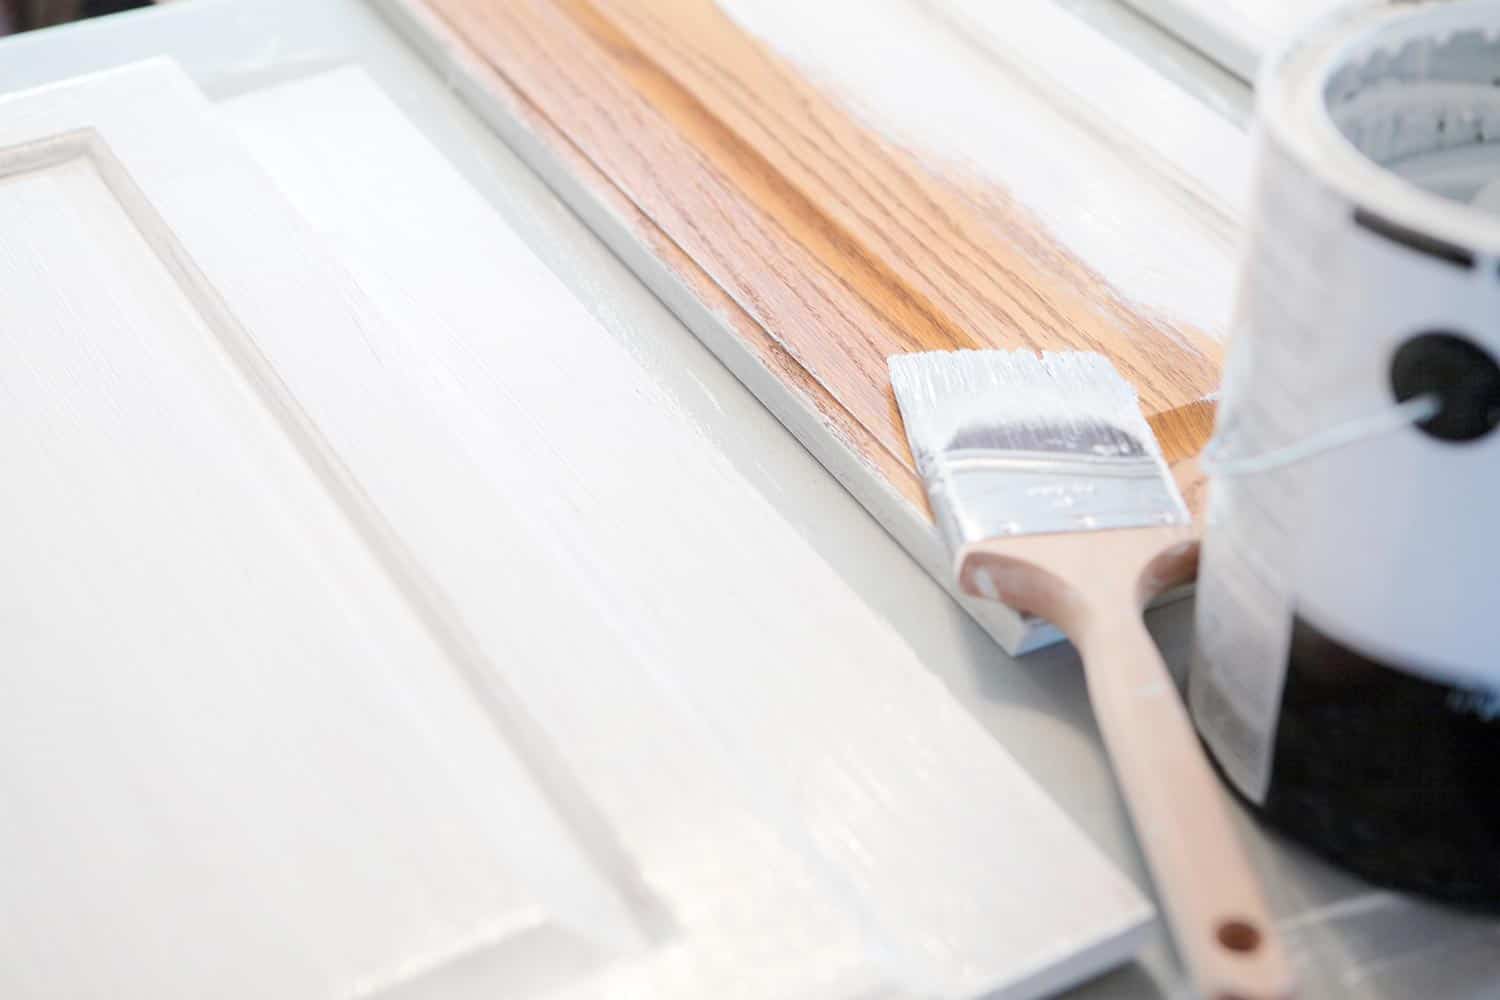 Painting kitchen cabinets with white paint